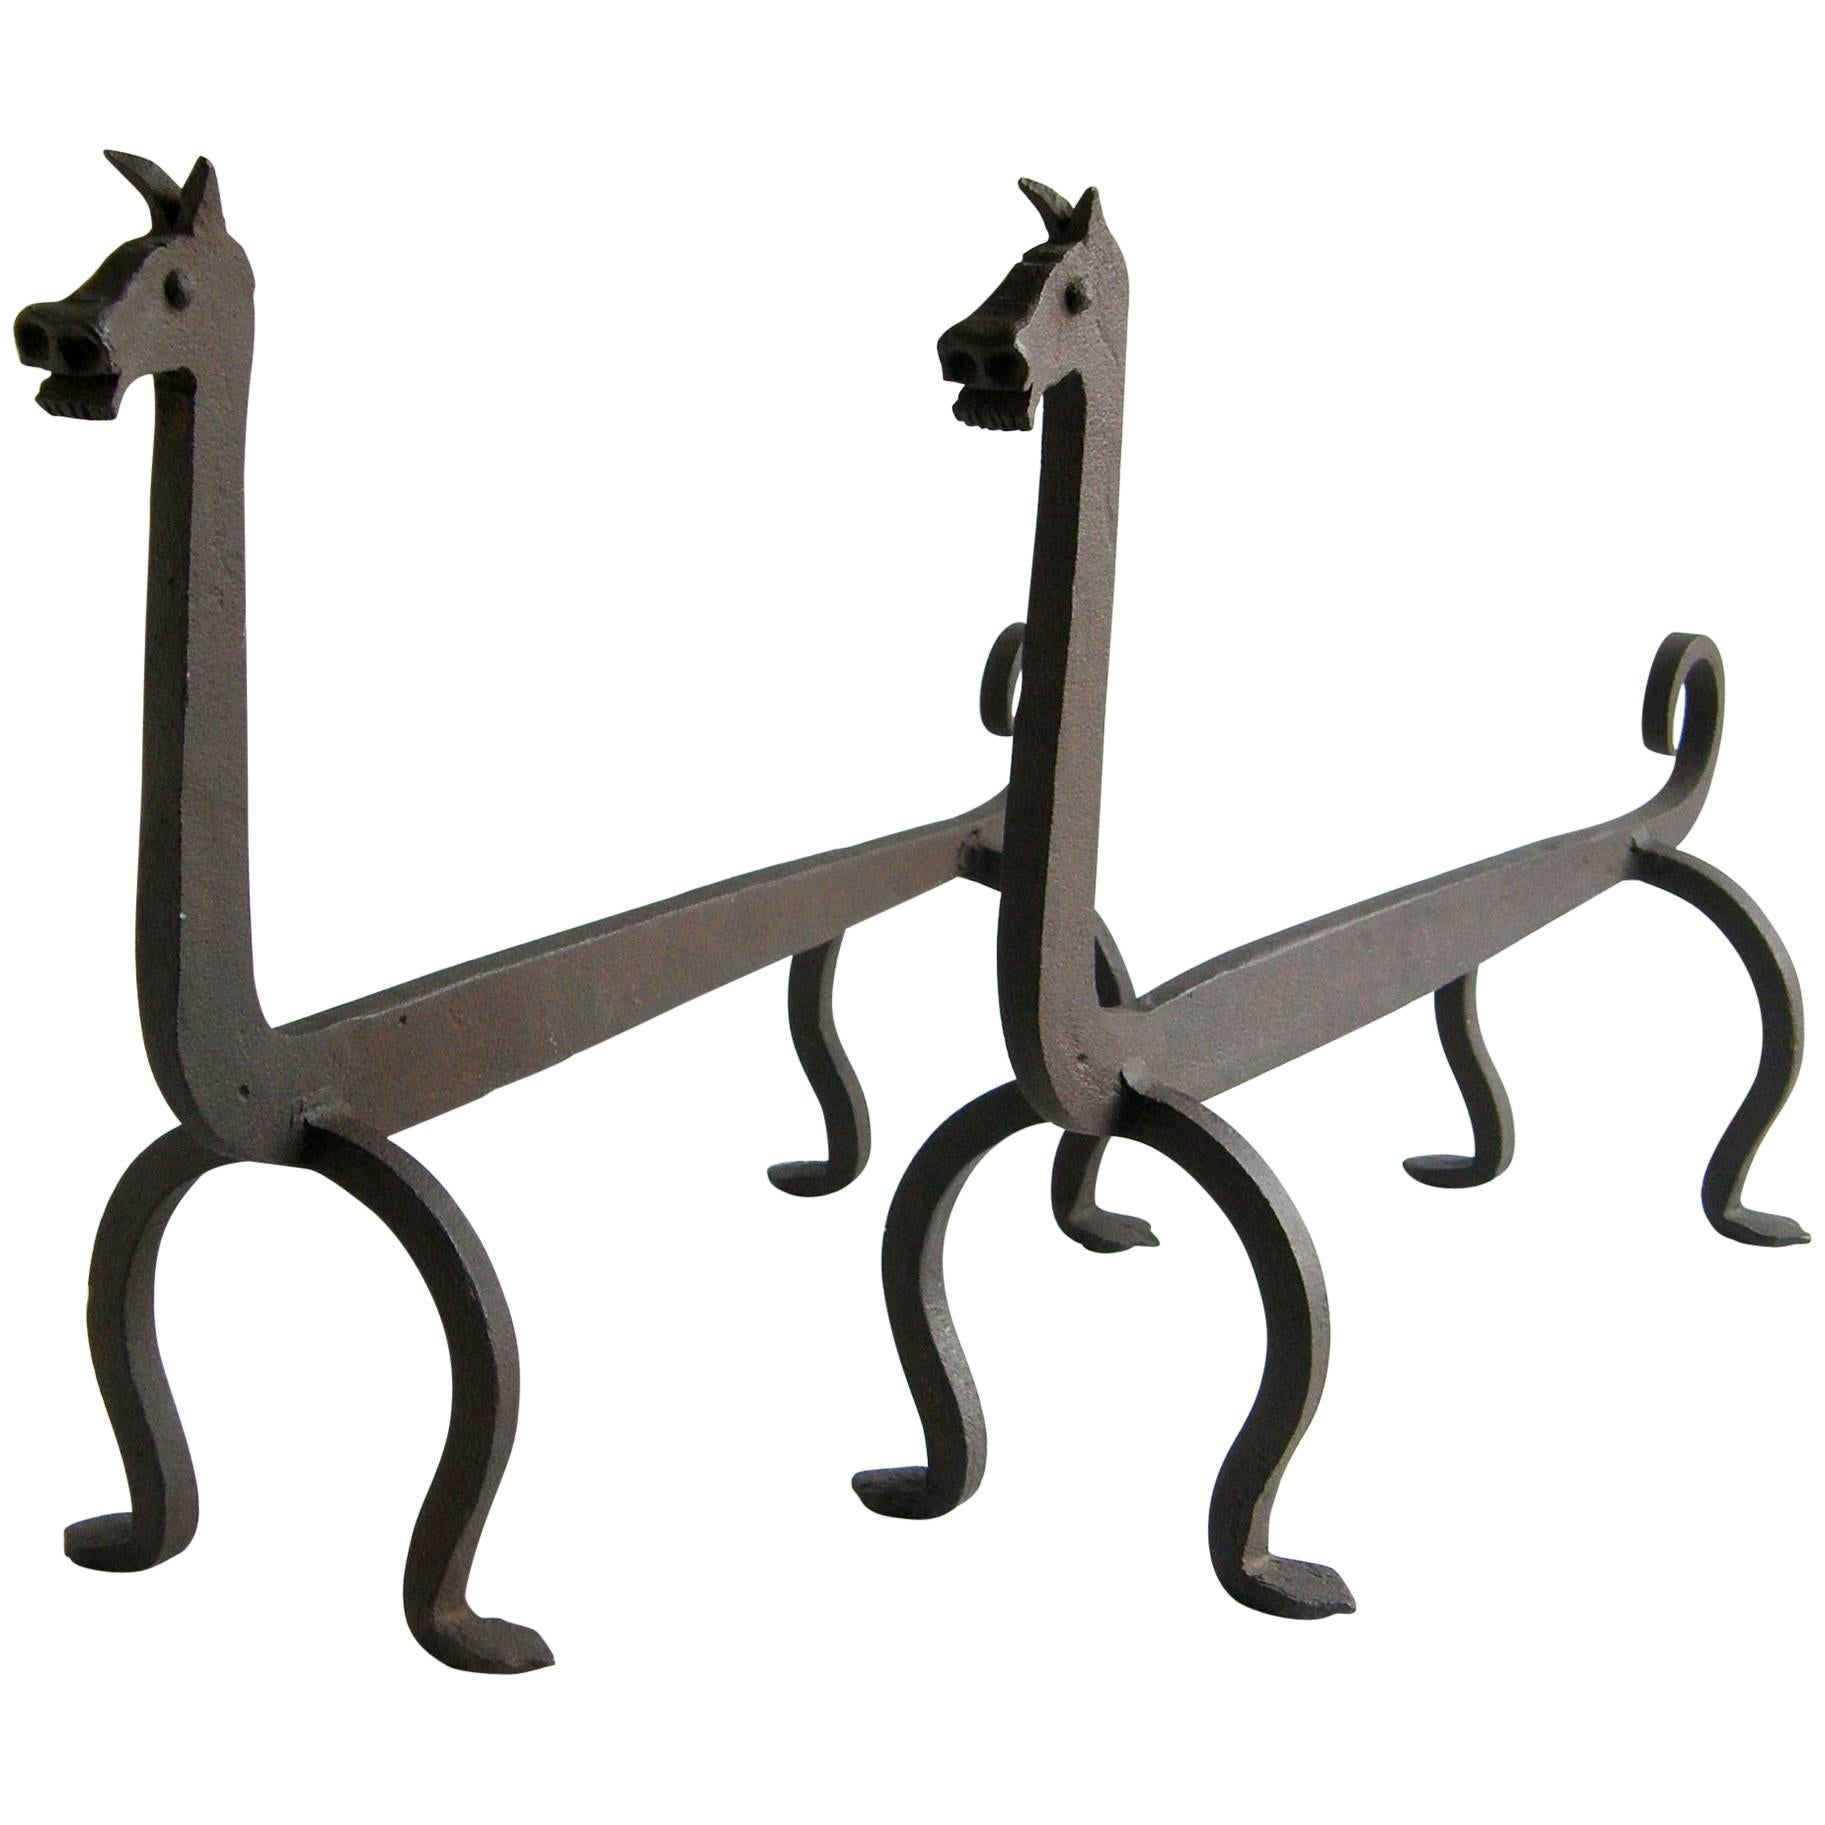 Figural Wrought Iron Fire Dog Andirons